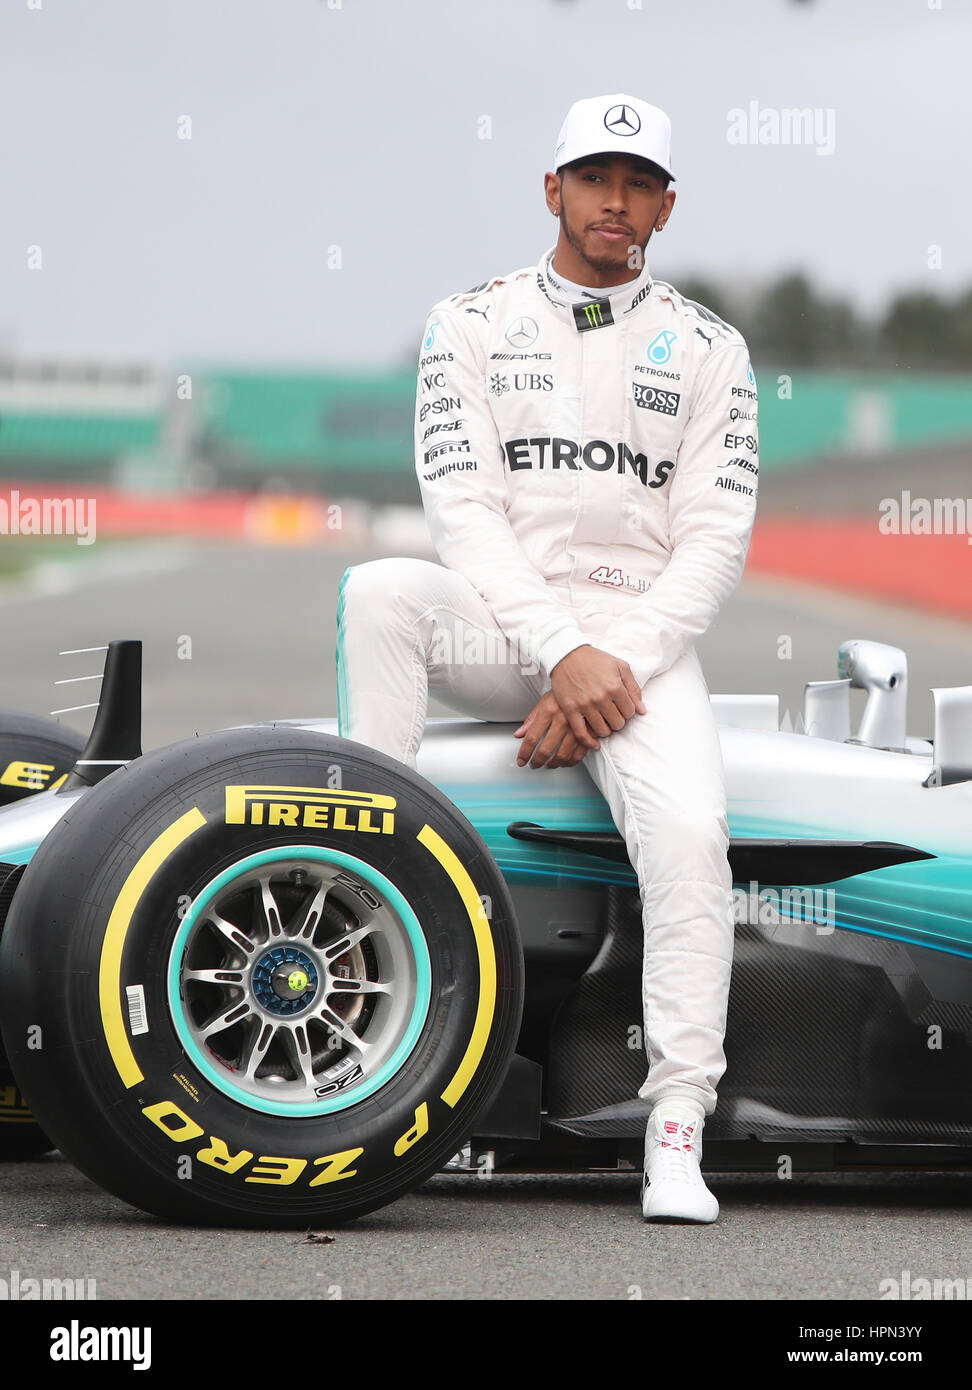 Lewis Hamilton with the new Mercedes W08 Formula One car during the  Mercedes-AMG 2017 Car Launch at Silverstone, Towcester Stock Photo - Alamy